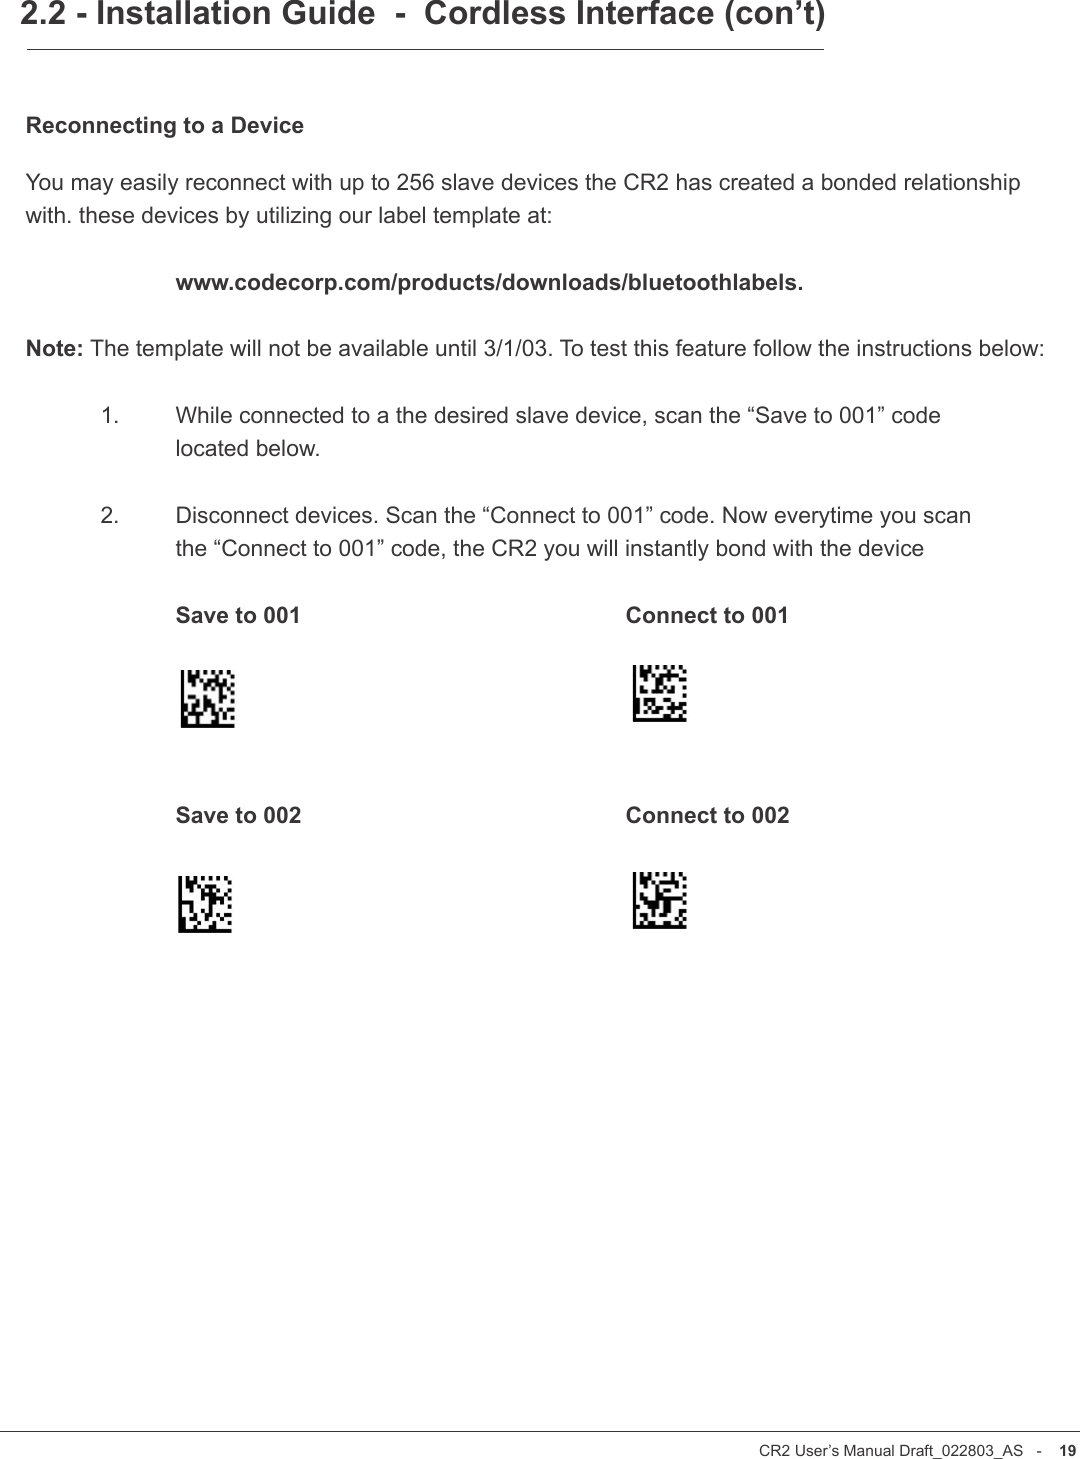 CR2 User’s Manual Draft_022803_AS   -    18CR2 User’s Manual Draft_022803_AS   -    19Reconnecting to a DeviceYou may easily reconnect with up to 256 slave devices the CR2 has created a bonded relationship with. these devices by utilizing our label template at:     www.codecorp.com/products/downloads/bluetoothlabels.Note: The template will not be available until 3/1/03. To test this feature follow the instructions below:  1.  While connected to a the desired slave device, scan the “Save to 001” code     located below.   2.   Disconnect devices. Scan the “Connect to 001” code. Now everytime you scan    the “Connect to 001” code, the CR2 you will instantly bond with the device    Save to 001          Connect to 001    Save to 002          Connect to 0022.2 - Installation Guide  -  Cordless Interface (con’t)